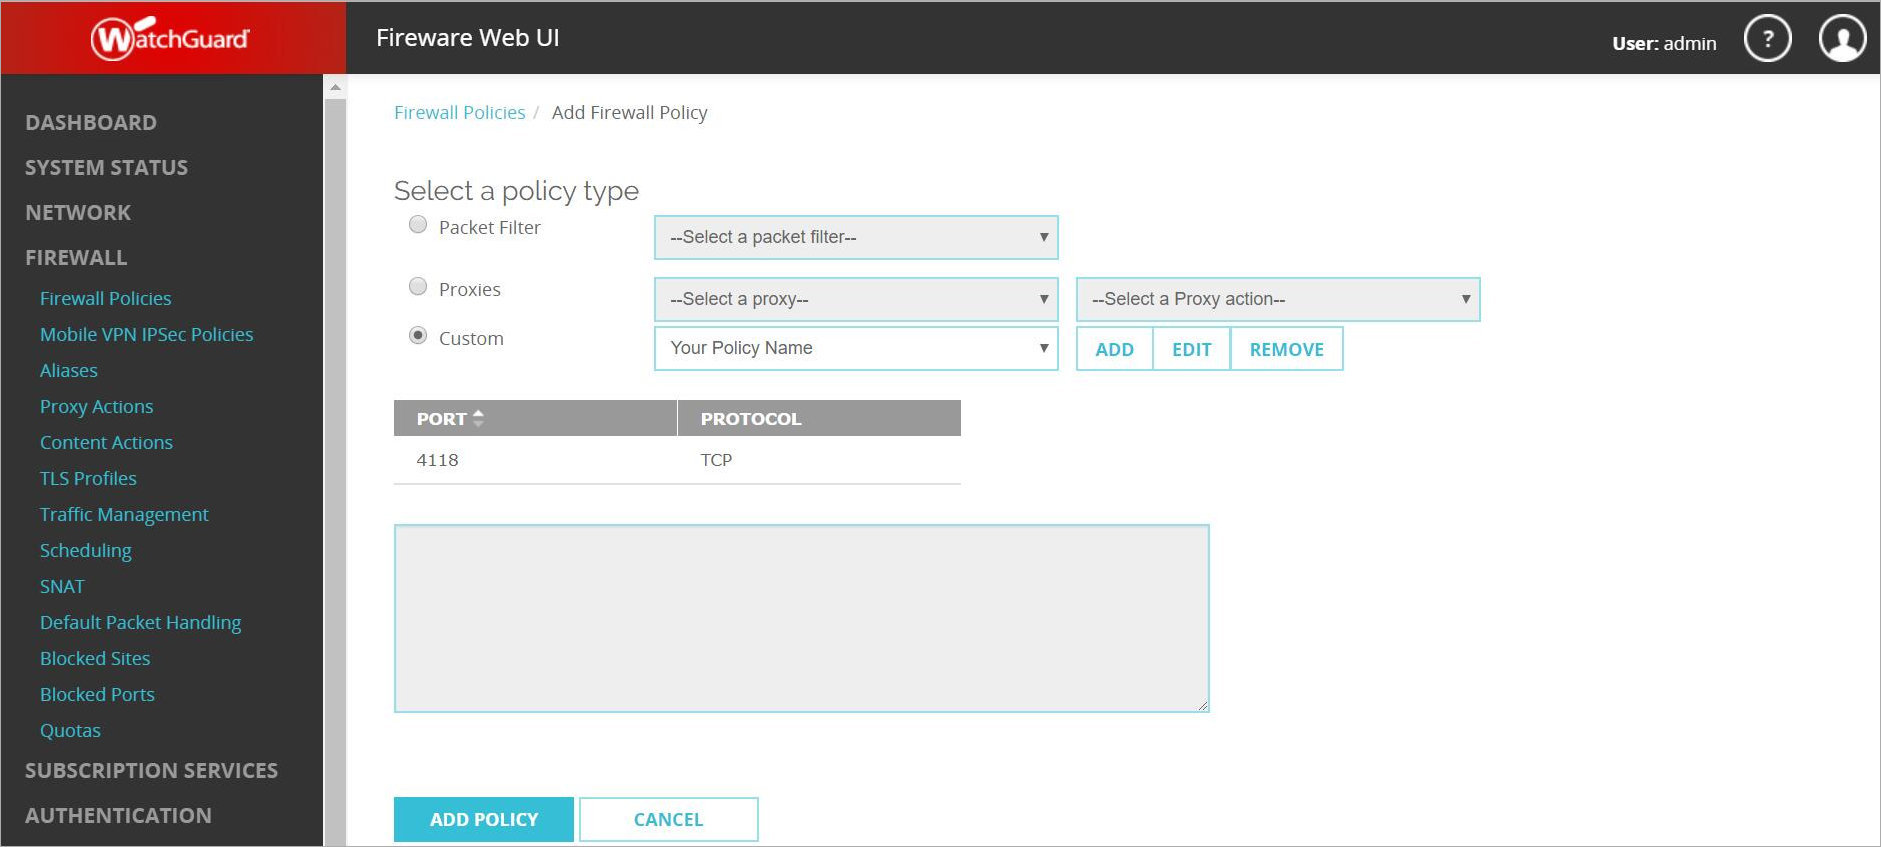 Screen shot of the Add Firewall Policy page